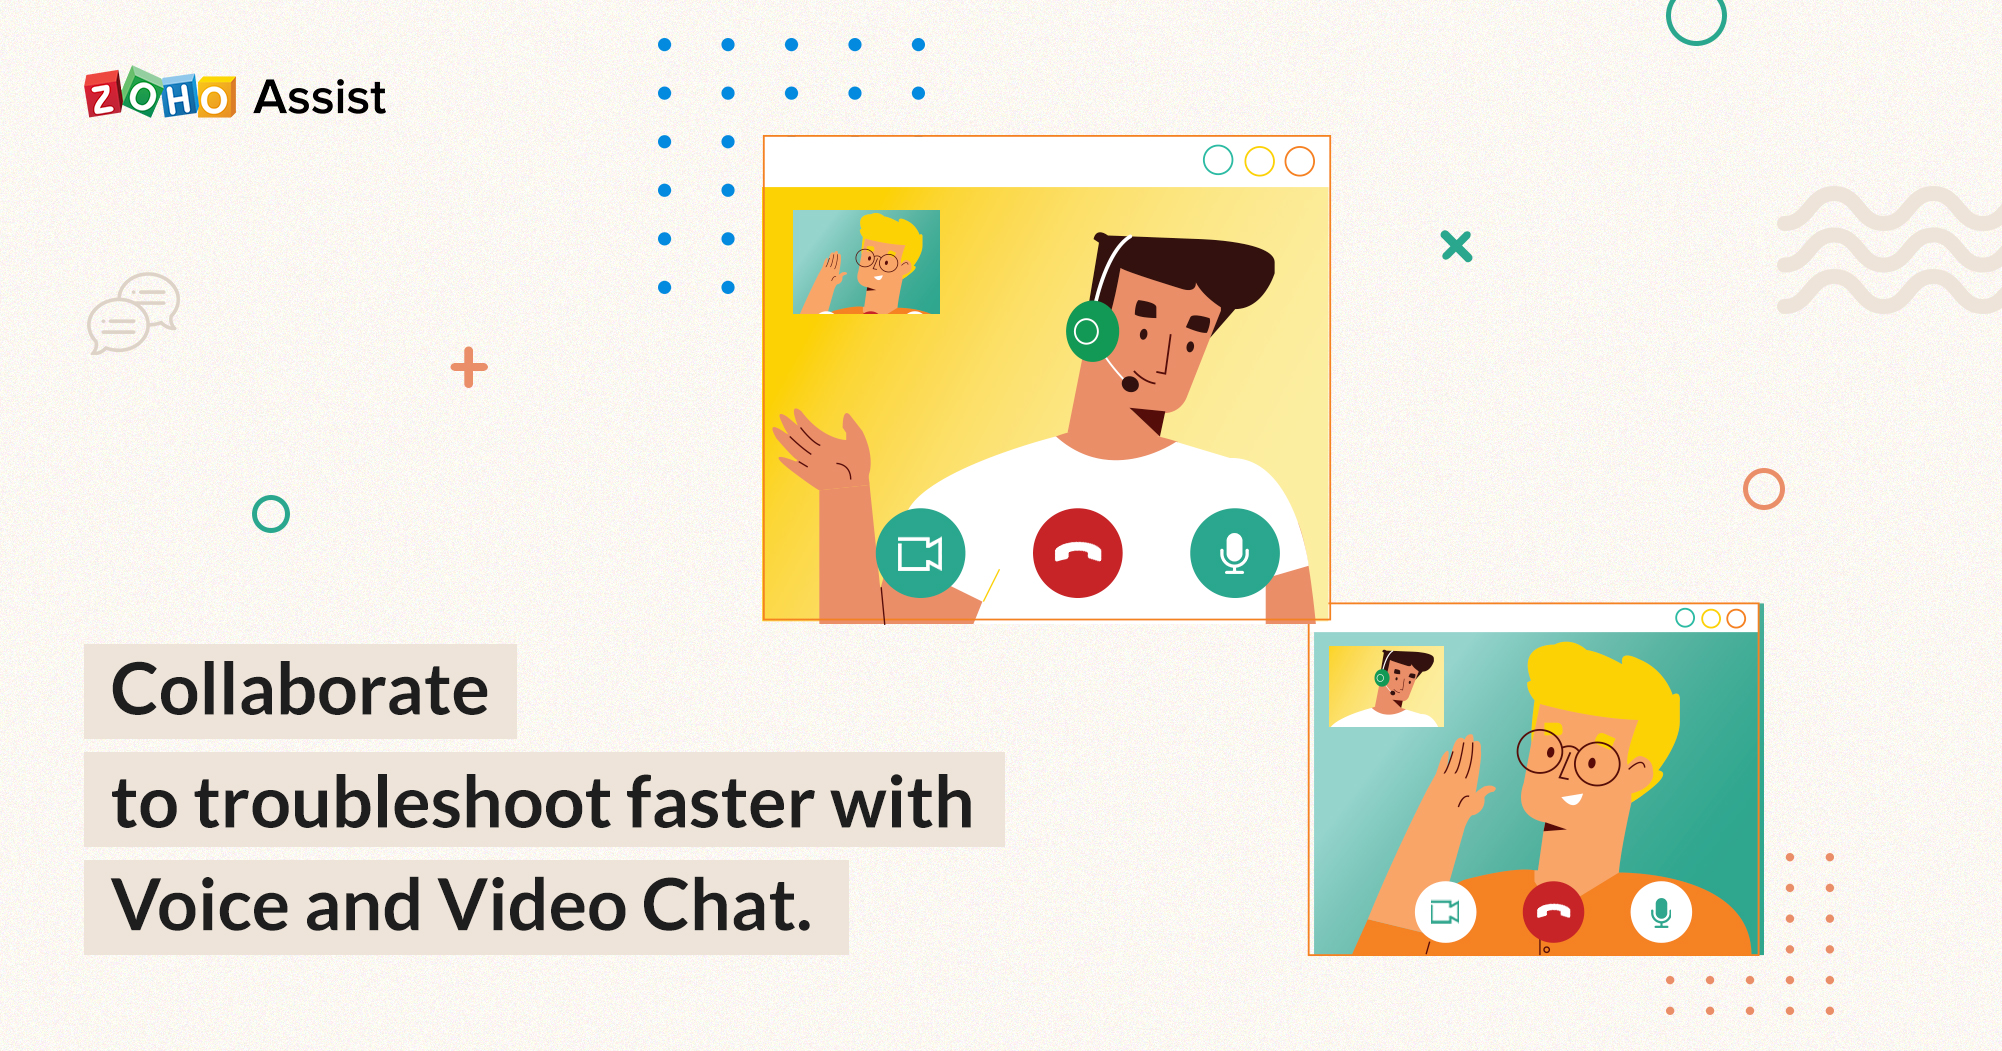 Even more ways to communicate: Zoho Assist now has voice and video chat